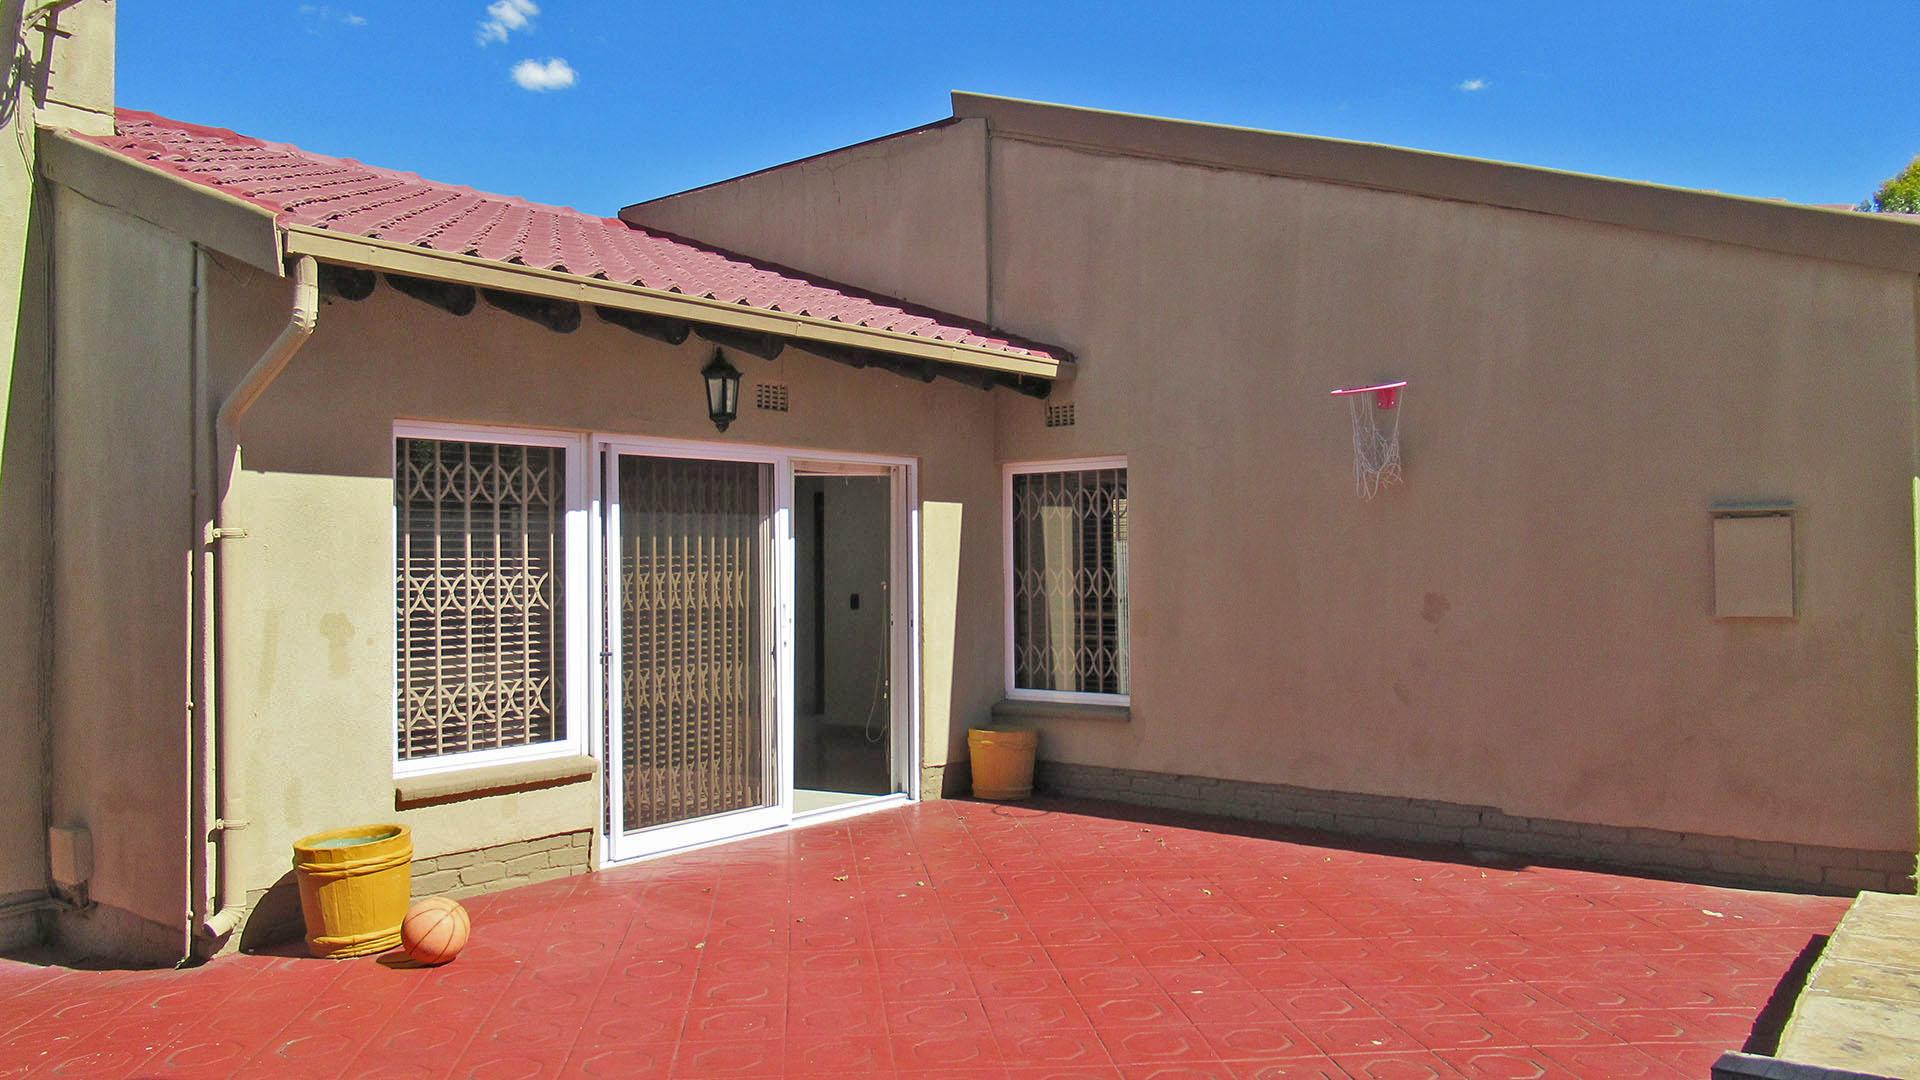 Front View of property in Brackendowns